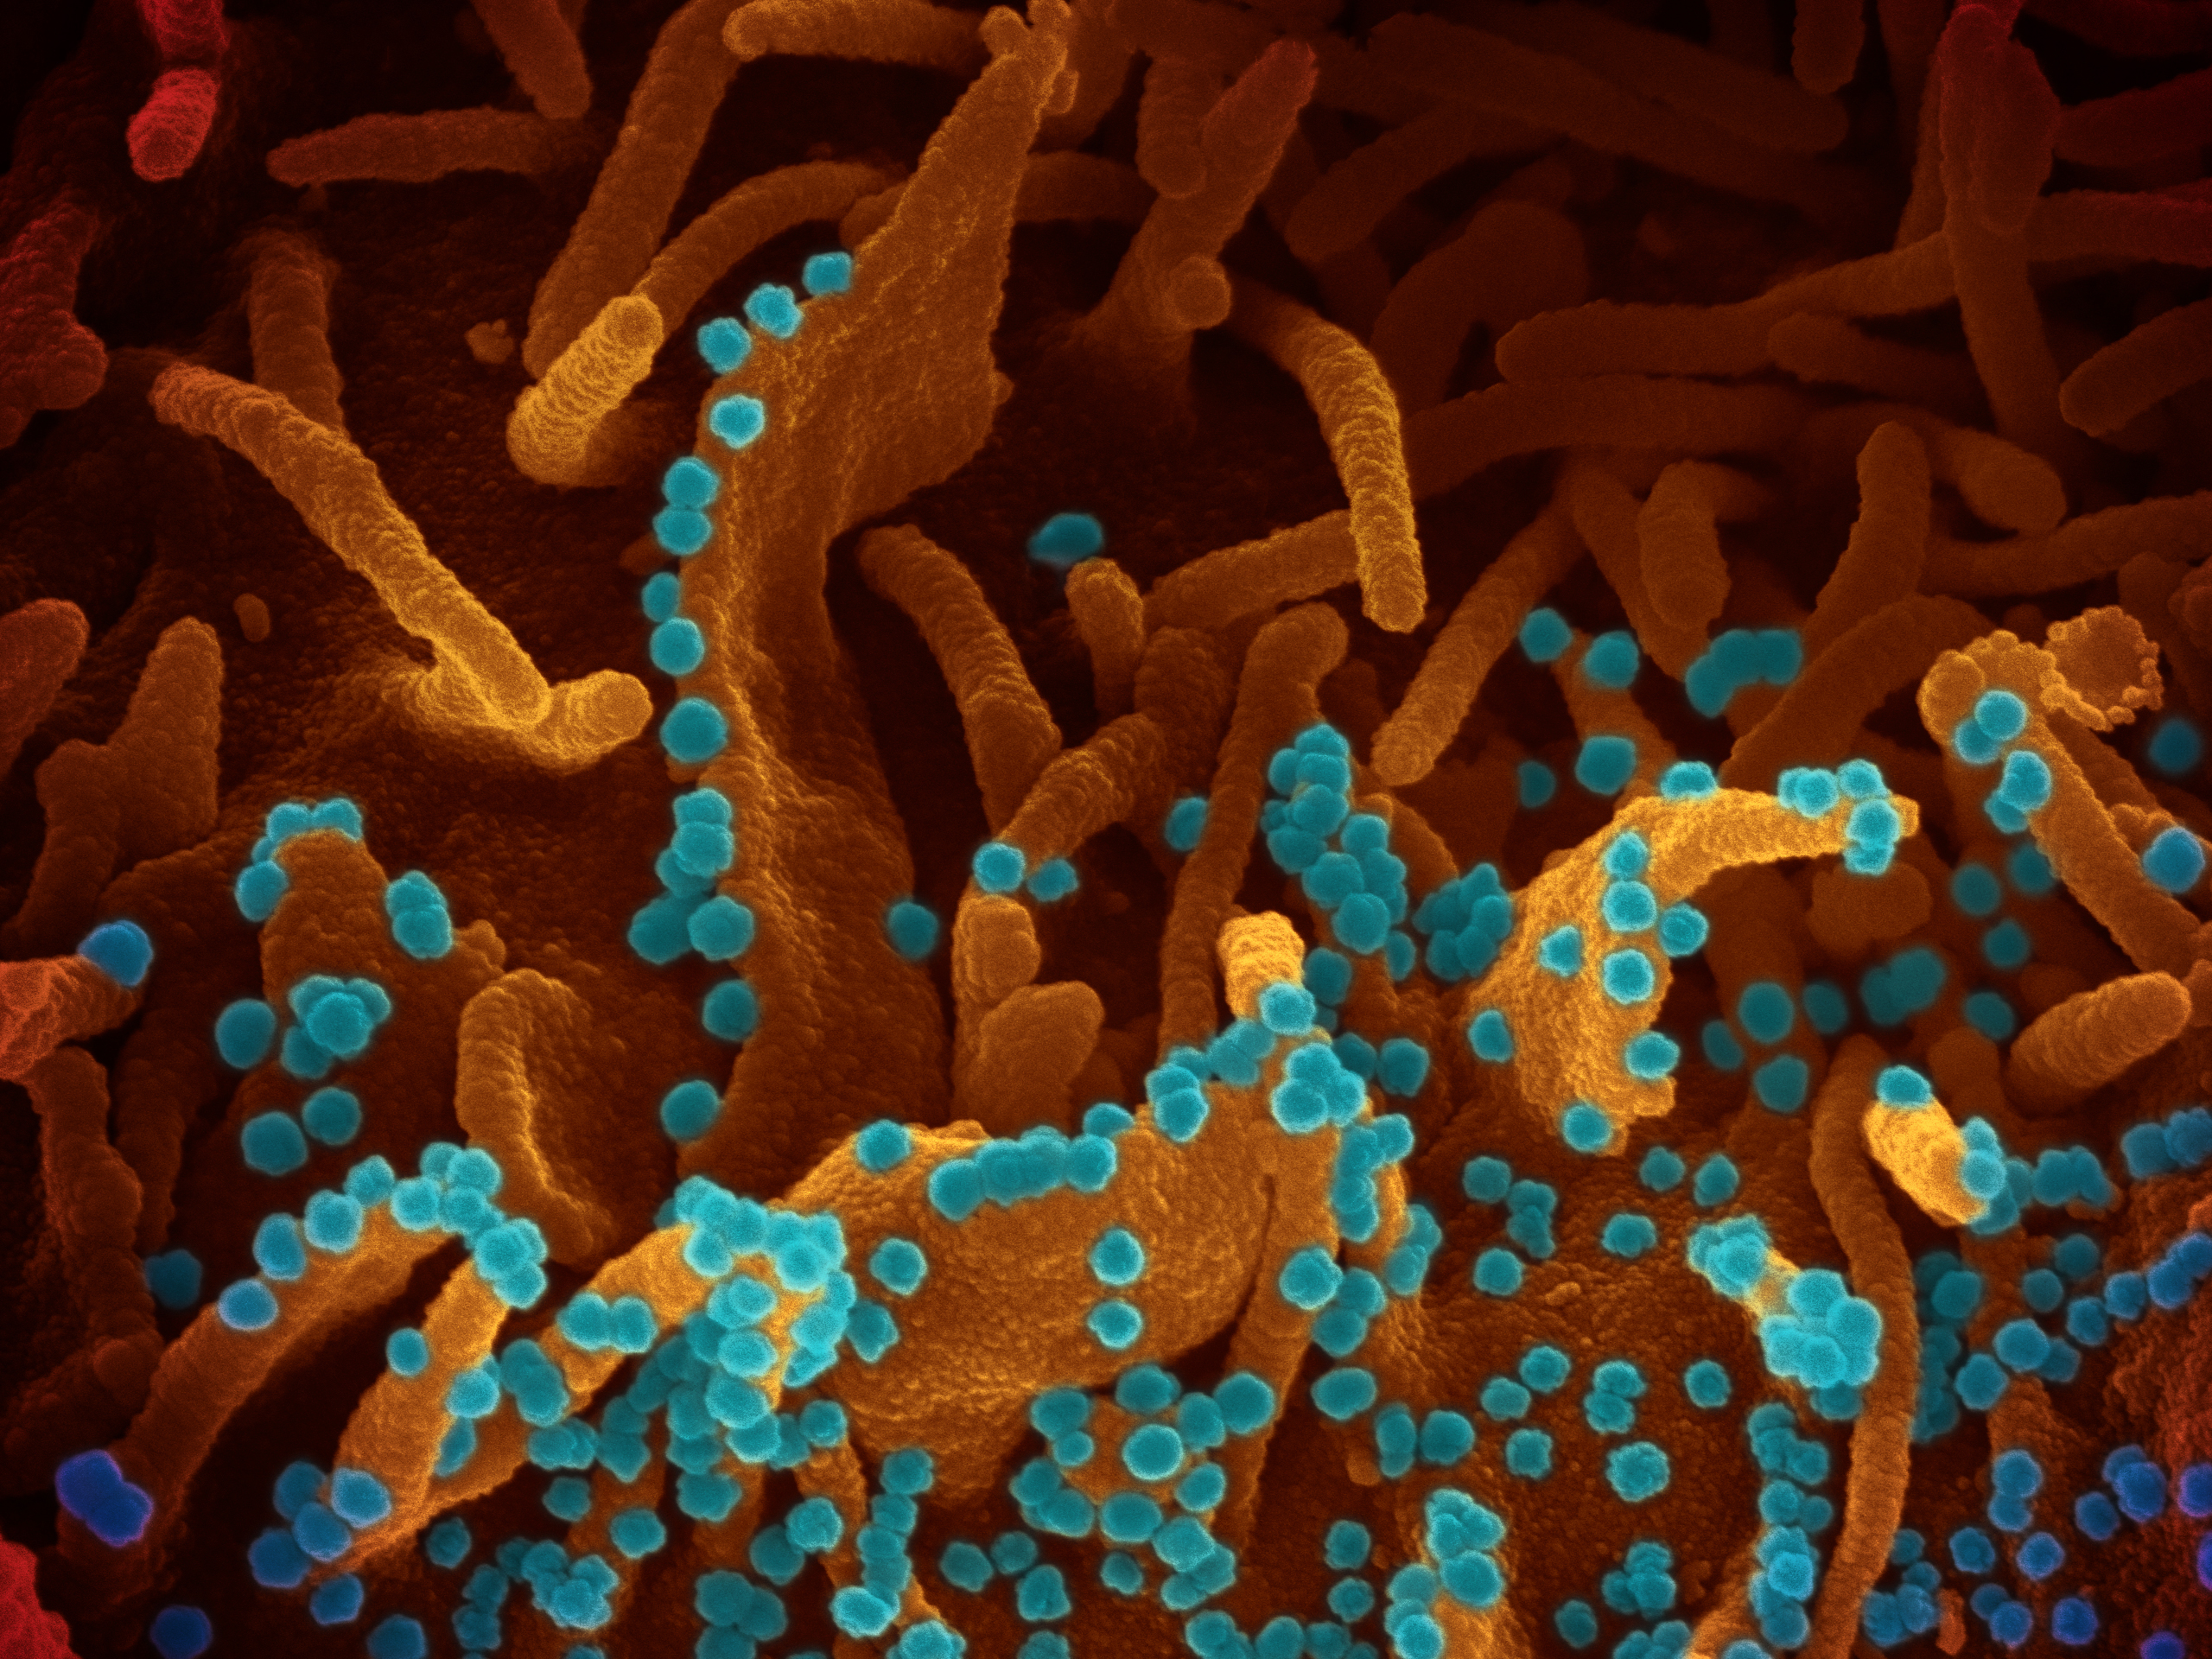 An electron microscope photograph showing viral particles (the small, blue spheres) being released from the surface of a dying kidney cell infected with the coronavirus. (Courtesy of Elizabeth Fischer)